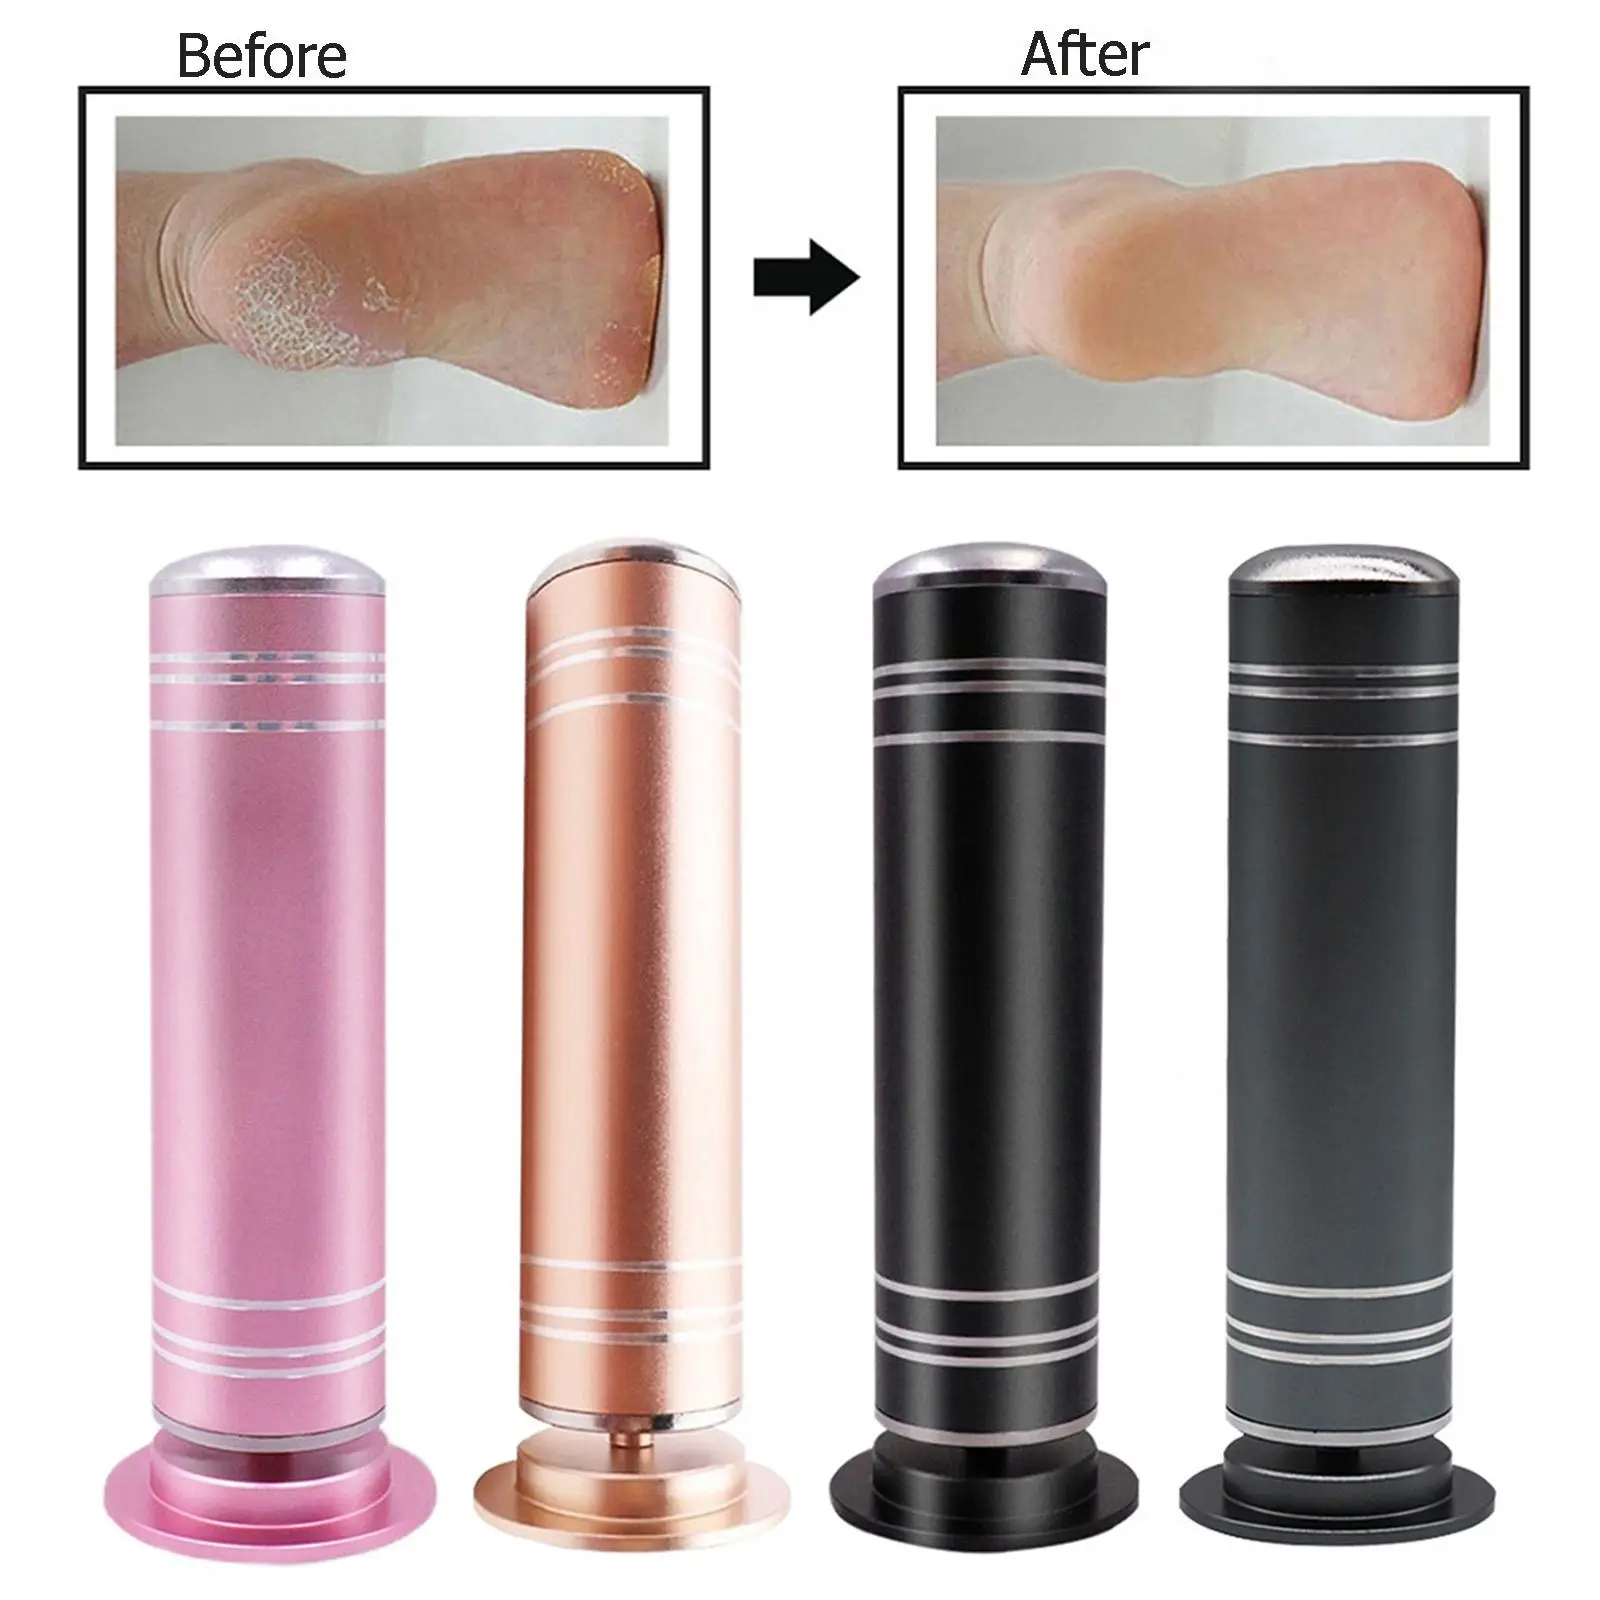 Electric Foot Pedicure Grinder Remover File Callus Feet Care Tools Portable Dead Skin Rechargeable for Home Use Salon Women Men